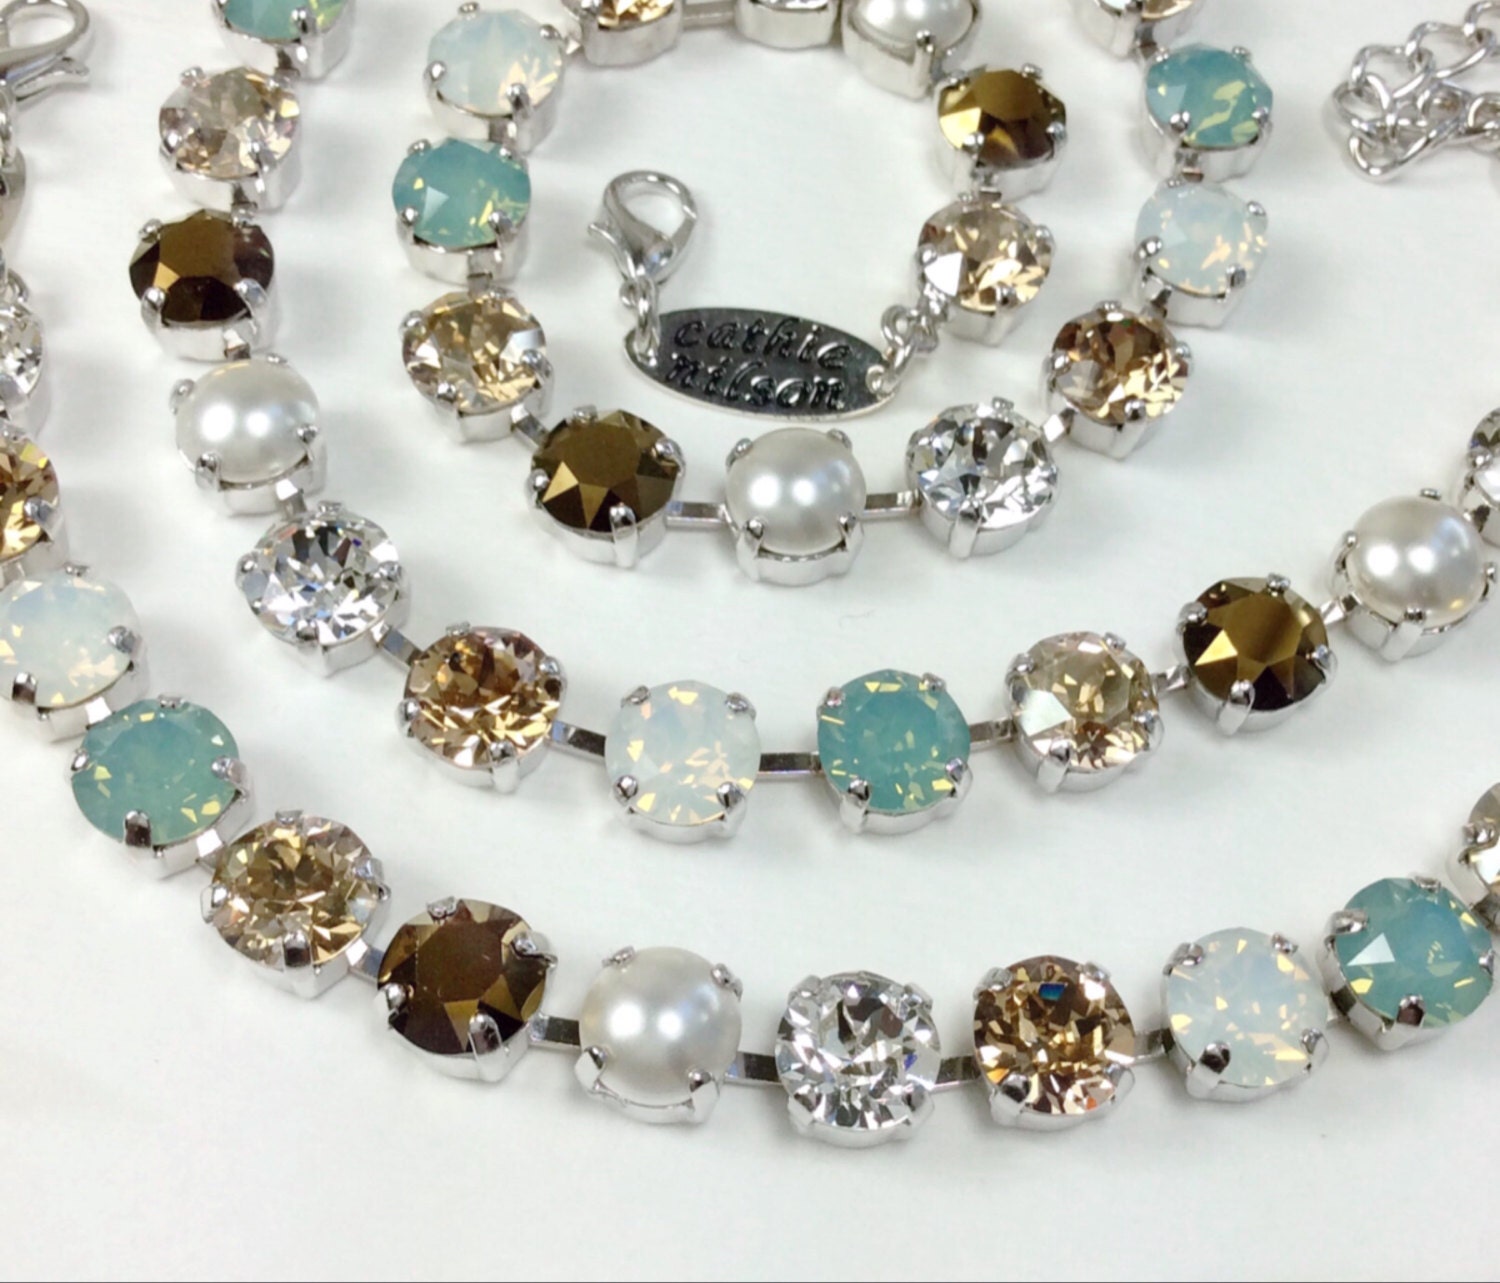 Swarovski Crystal 8.5mm Necklace & Bracelet - Designer Inspired- "Pacific Dream" - Pacific Opal, Creamy Pearls, Golden Hues - FREE SHIPPING